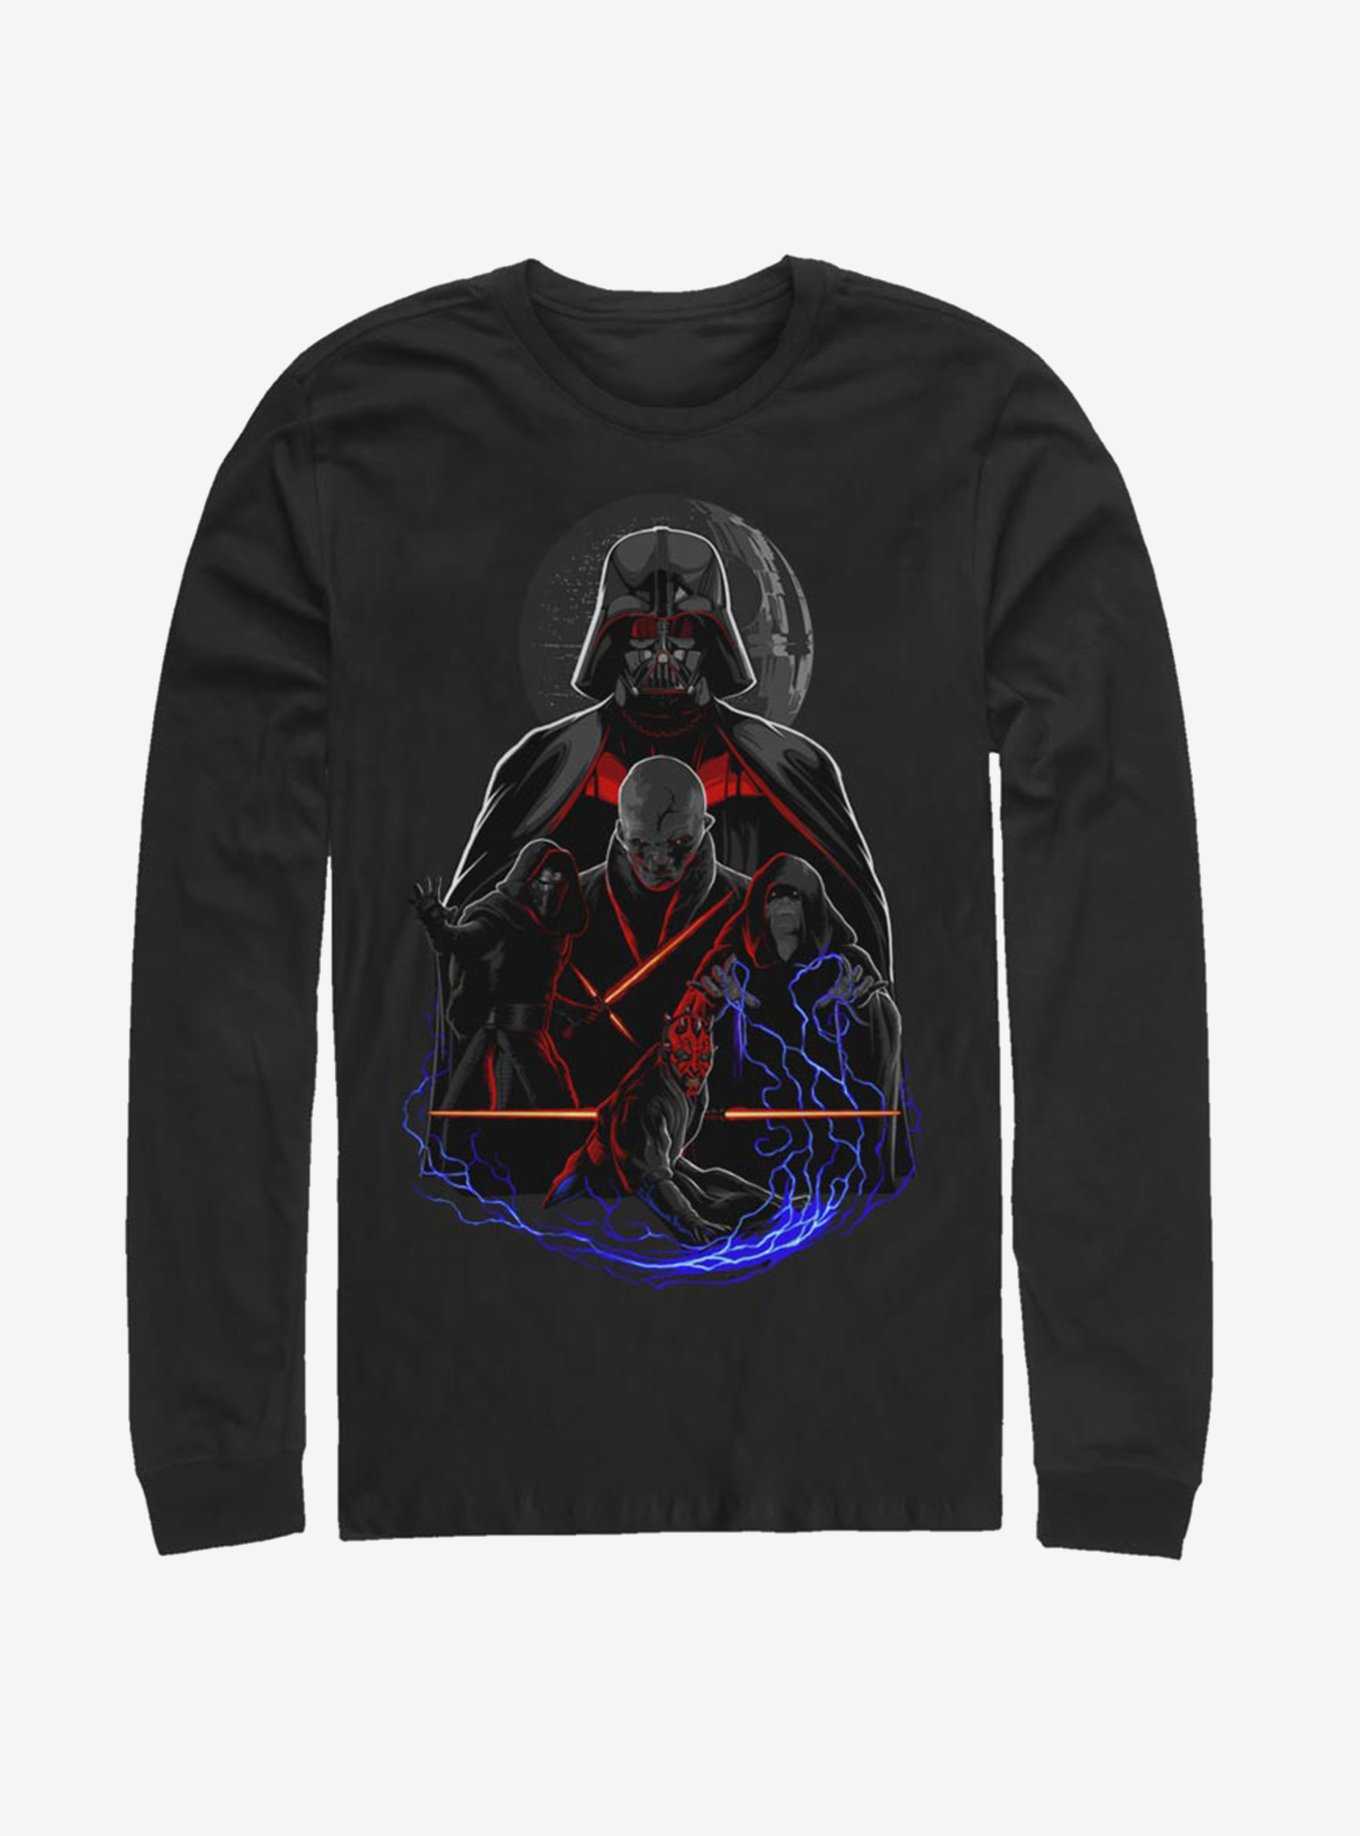 Star Wars Lords Of The Dark Side Long-Sleeve T-Shirt, , hi-res